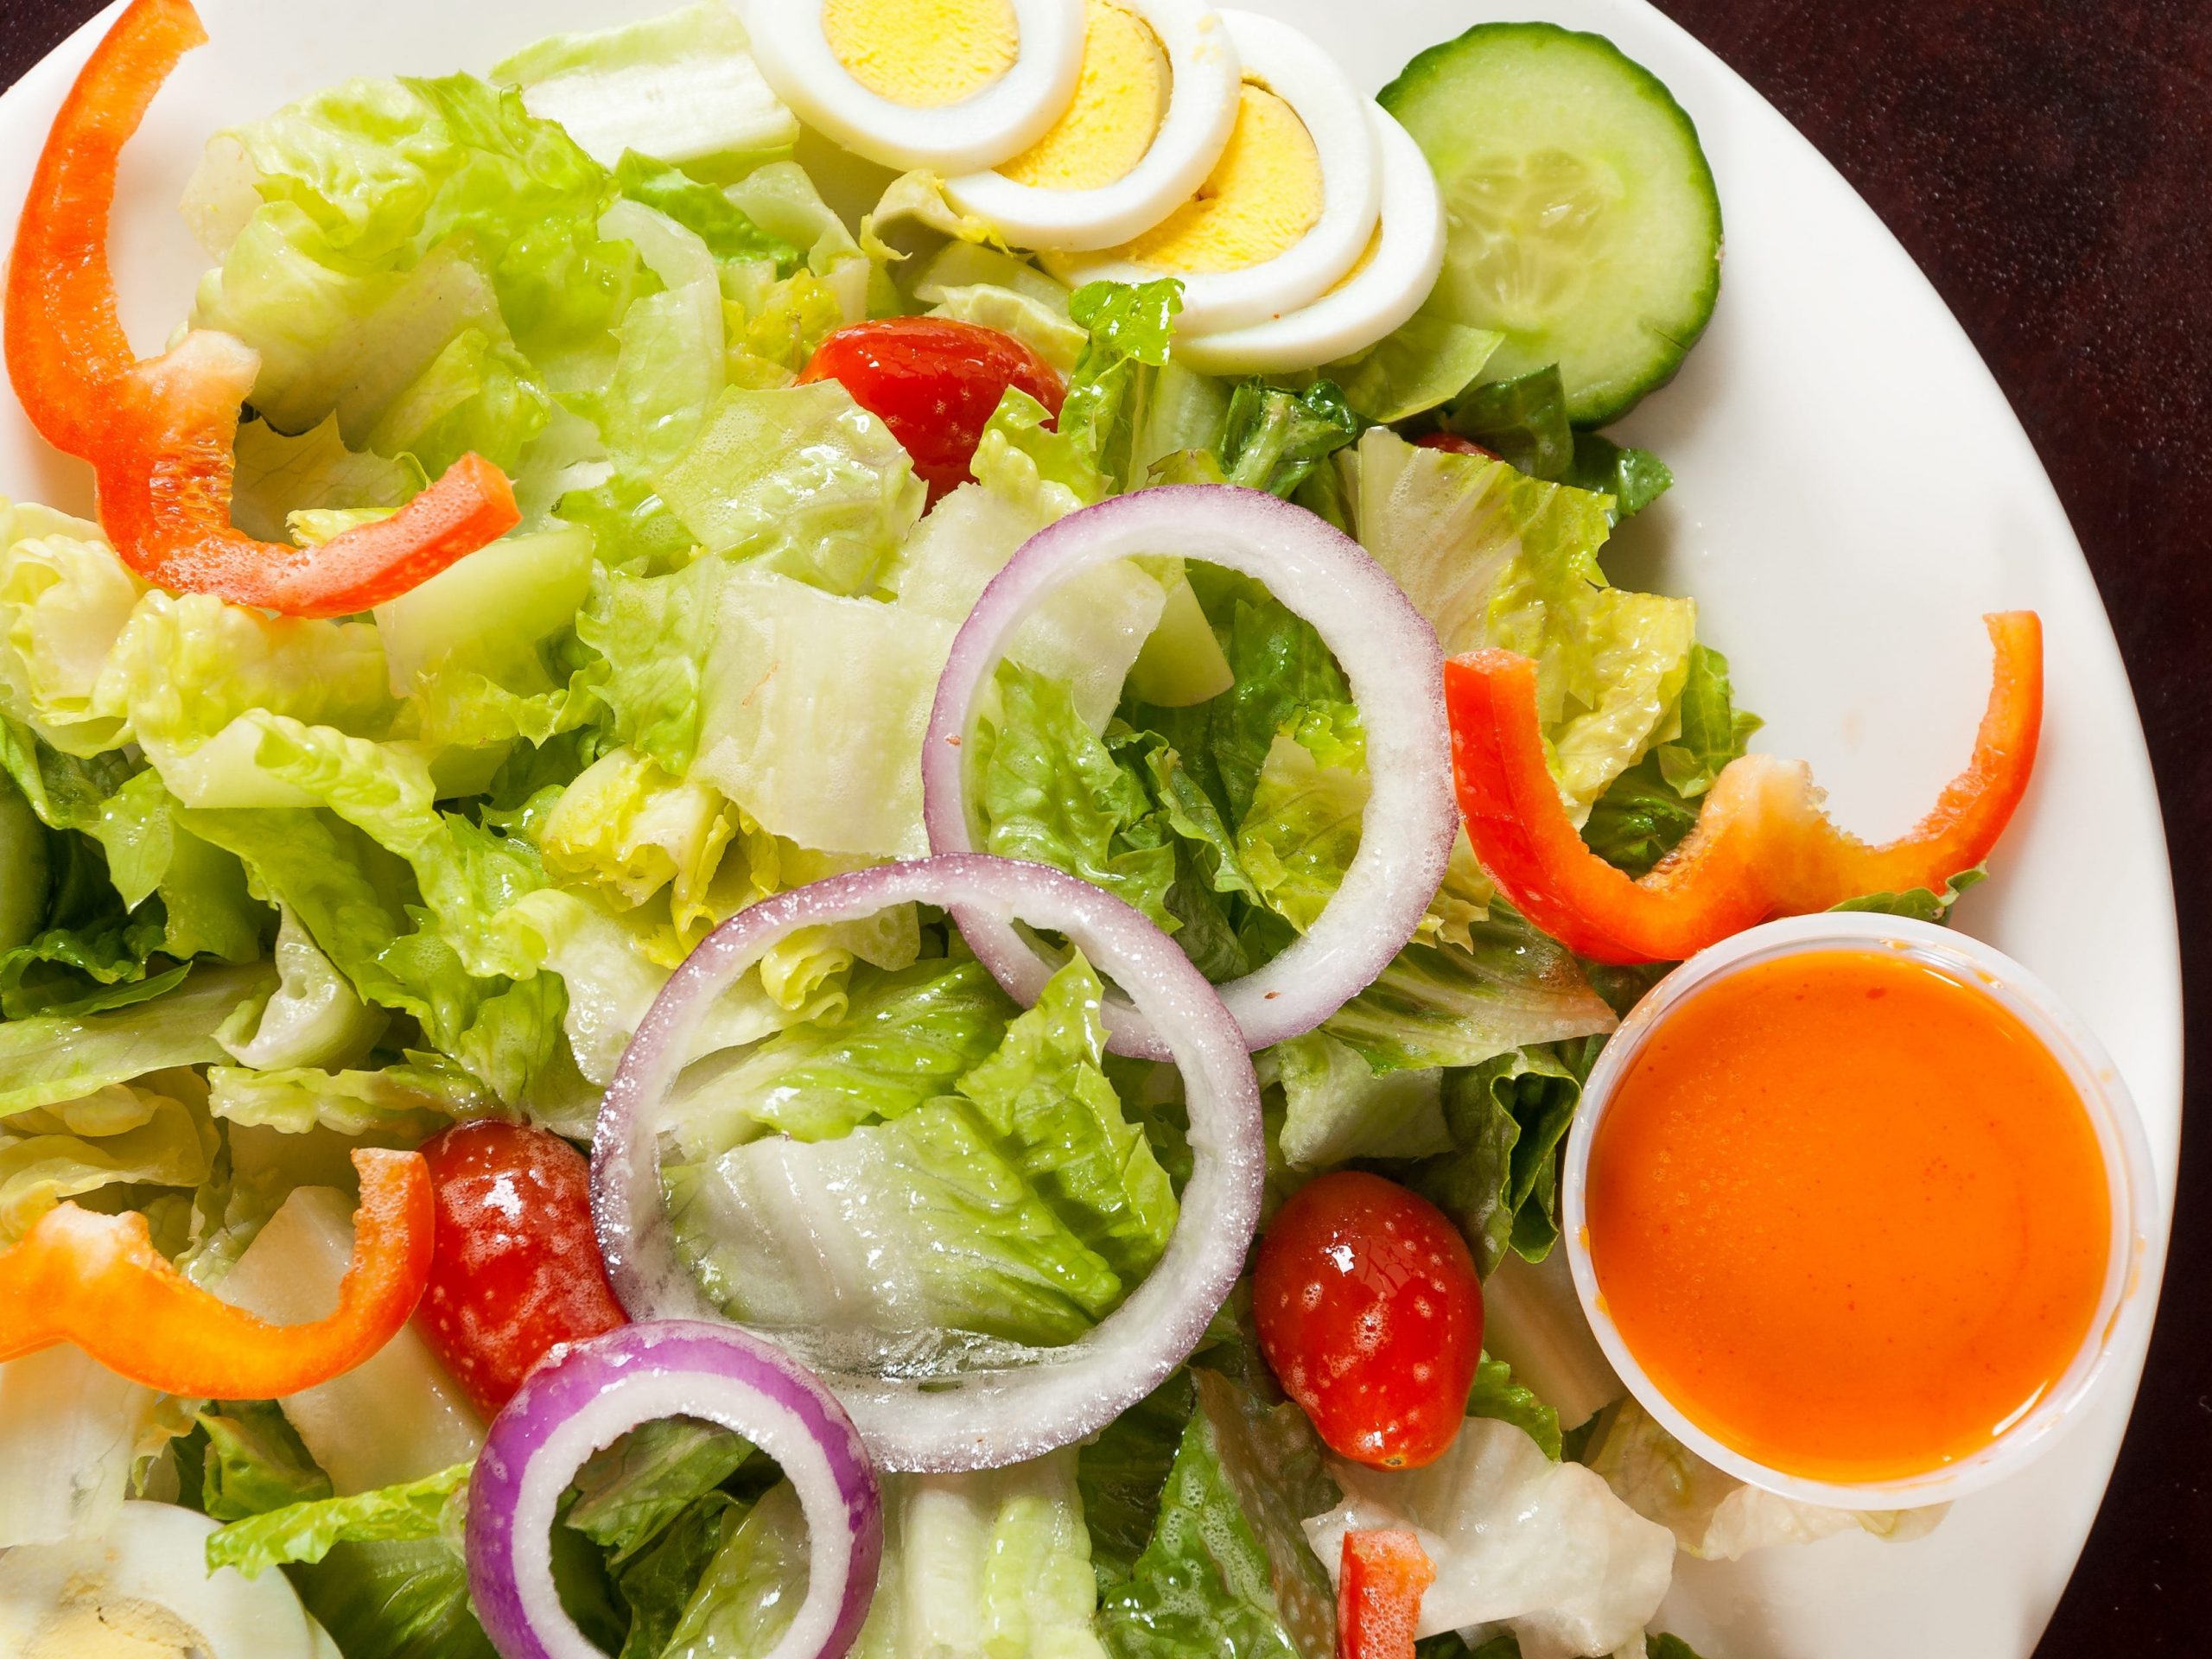 Salad with lettuce, cucumber, eggs, peppers, tomatoes, and French dressing